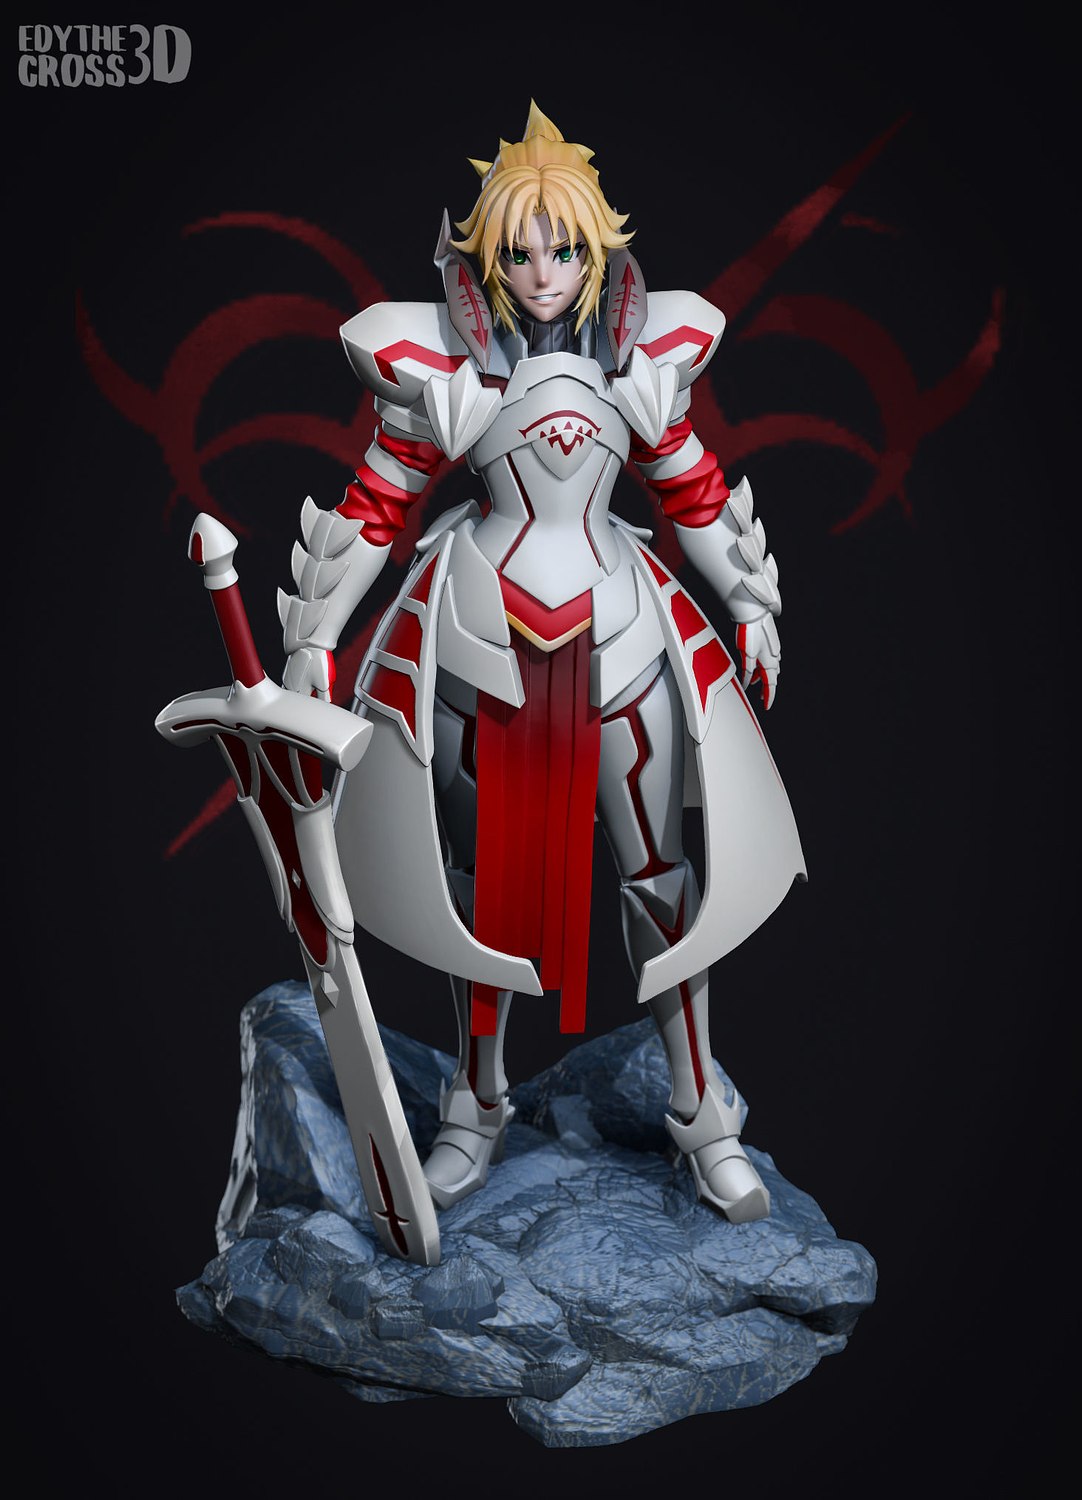 Mordred from Fate Grand Order